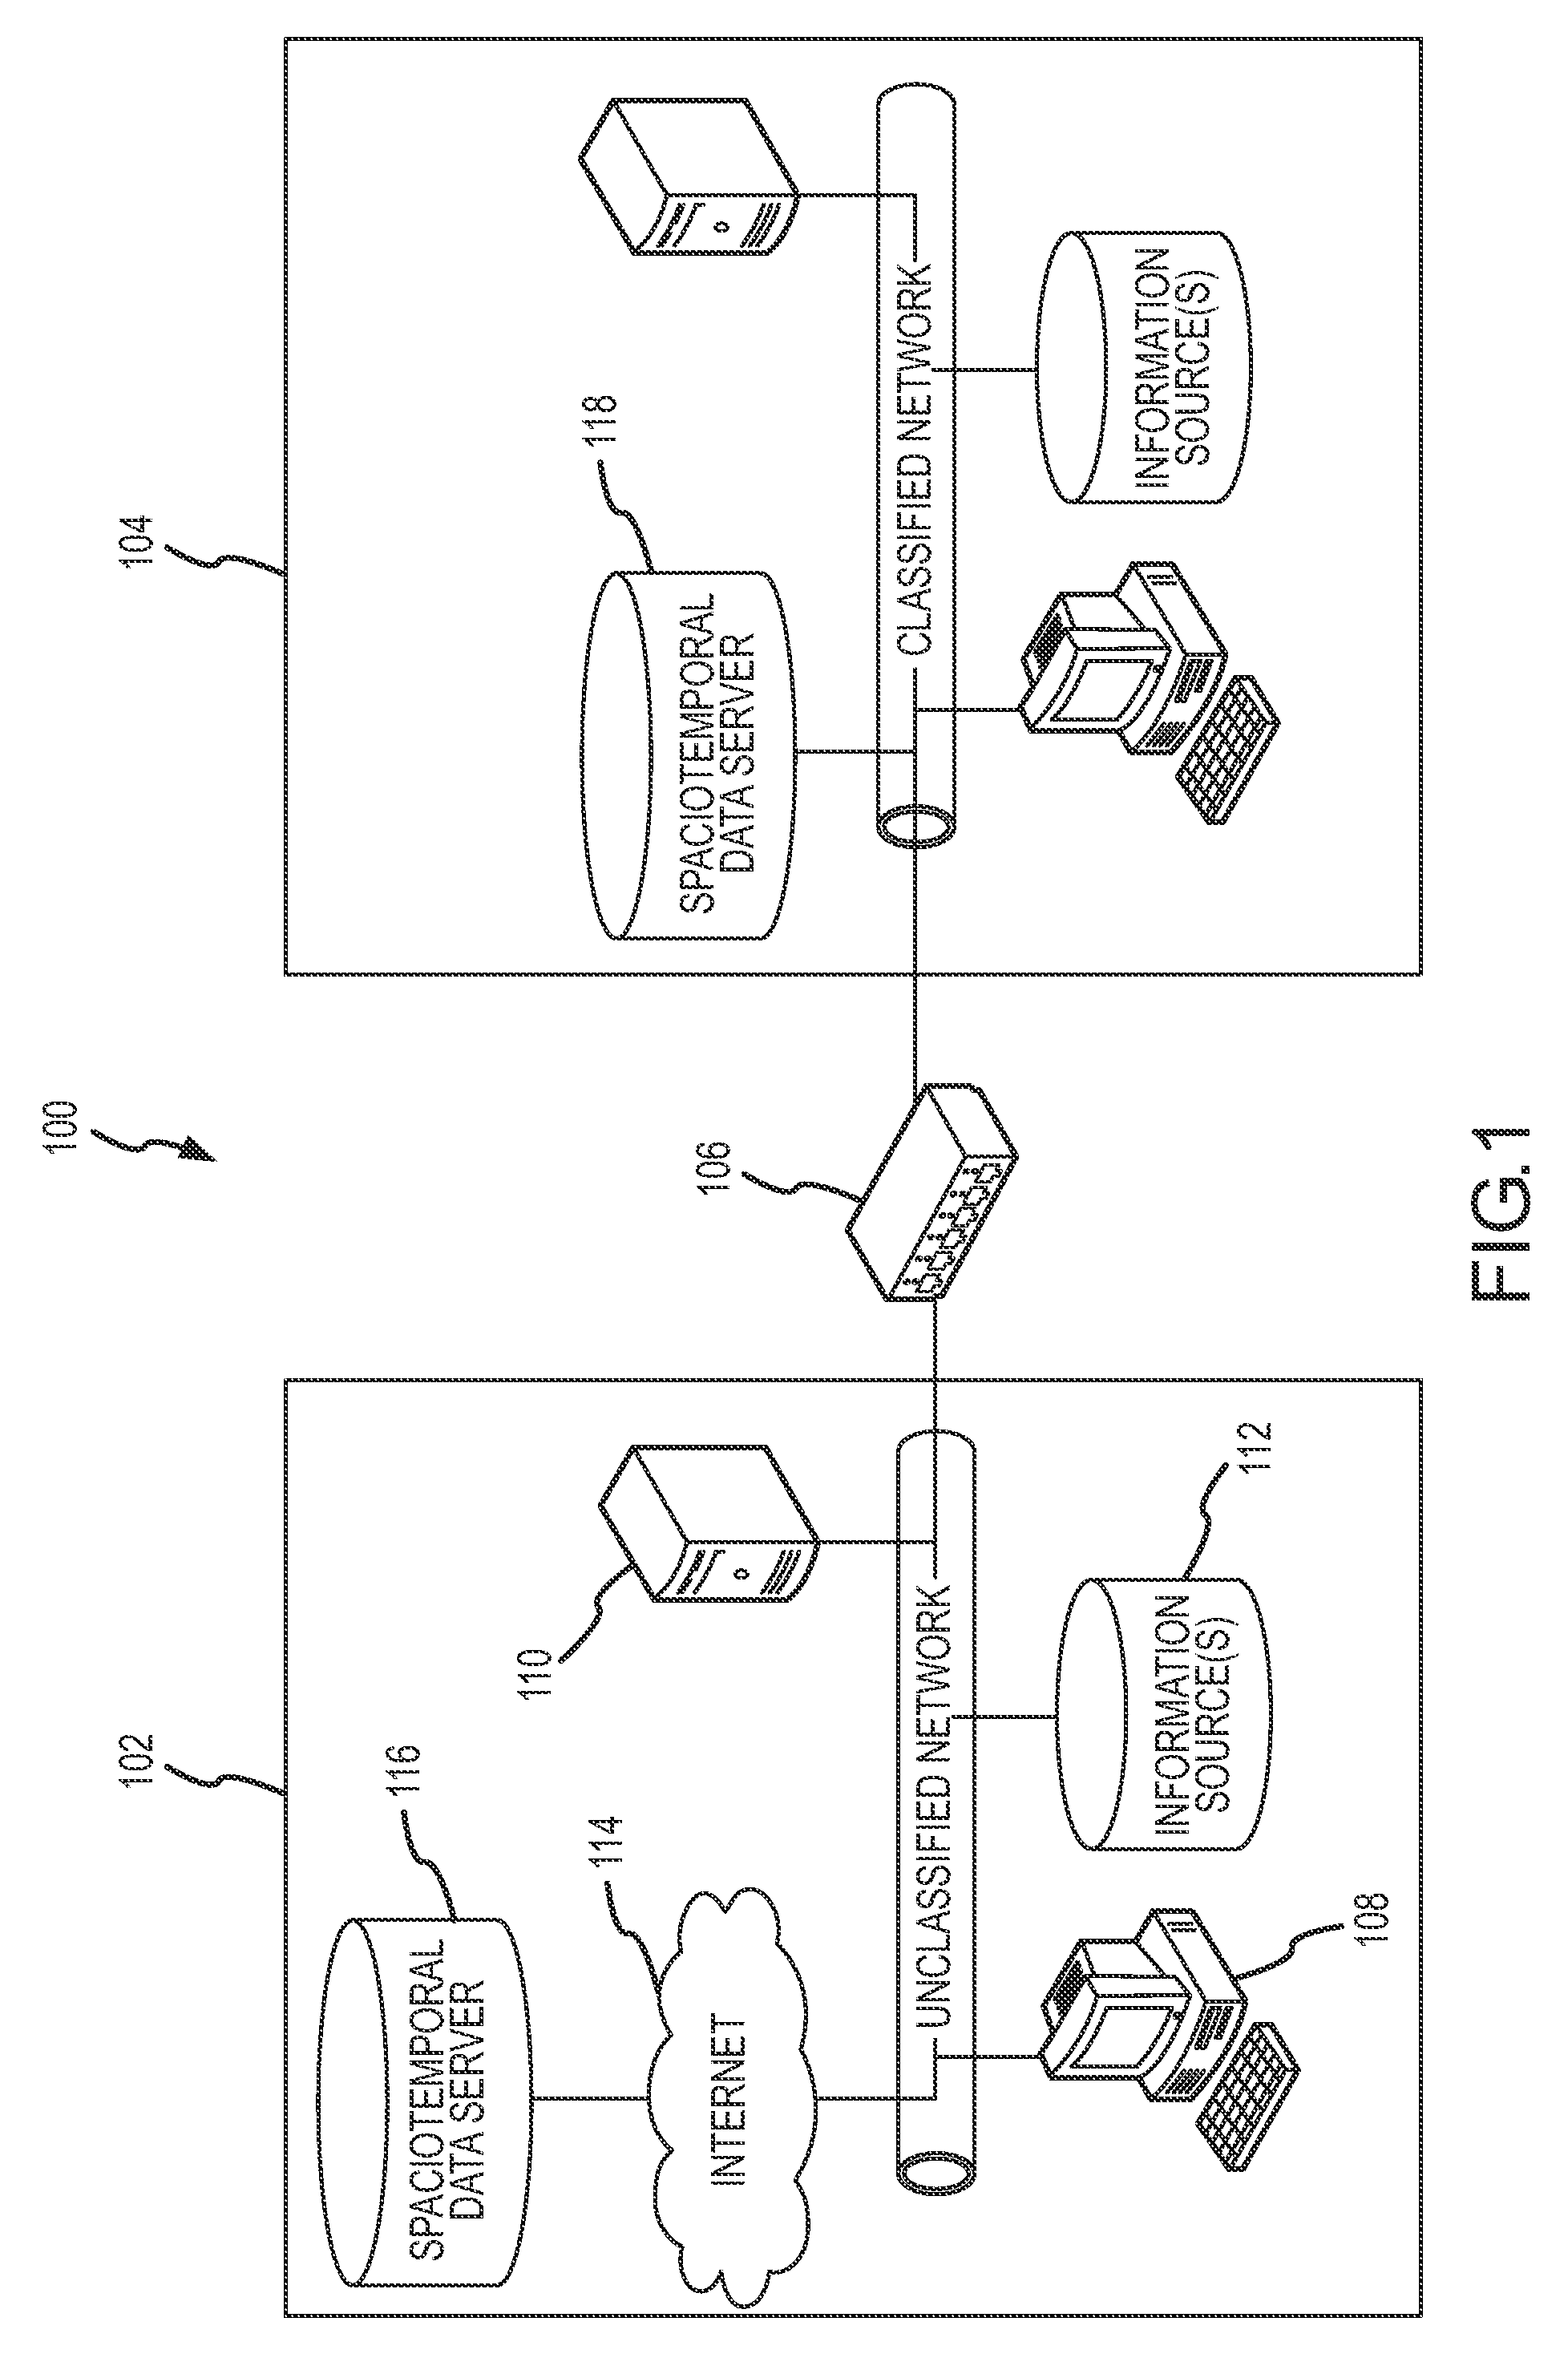 Spaciotemporal graphical user interface for collaborative and secure information sharing